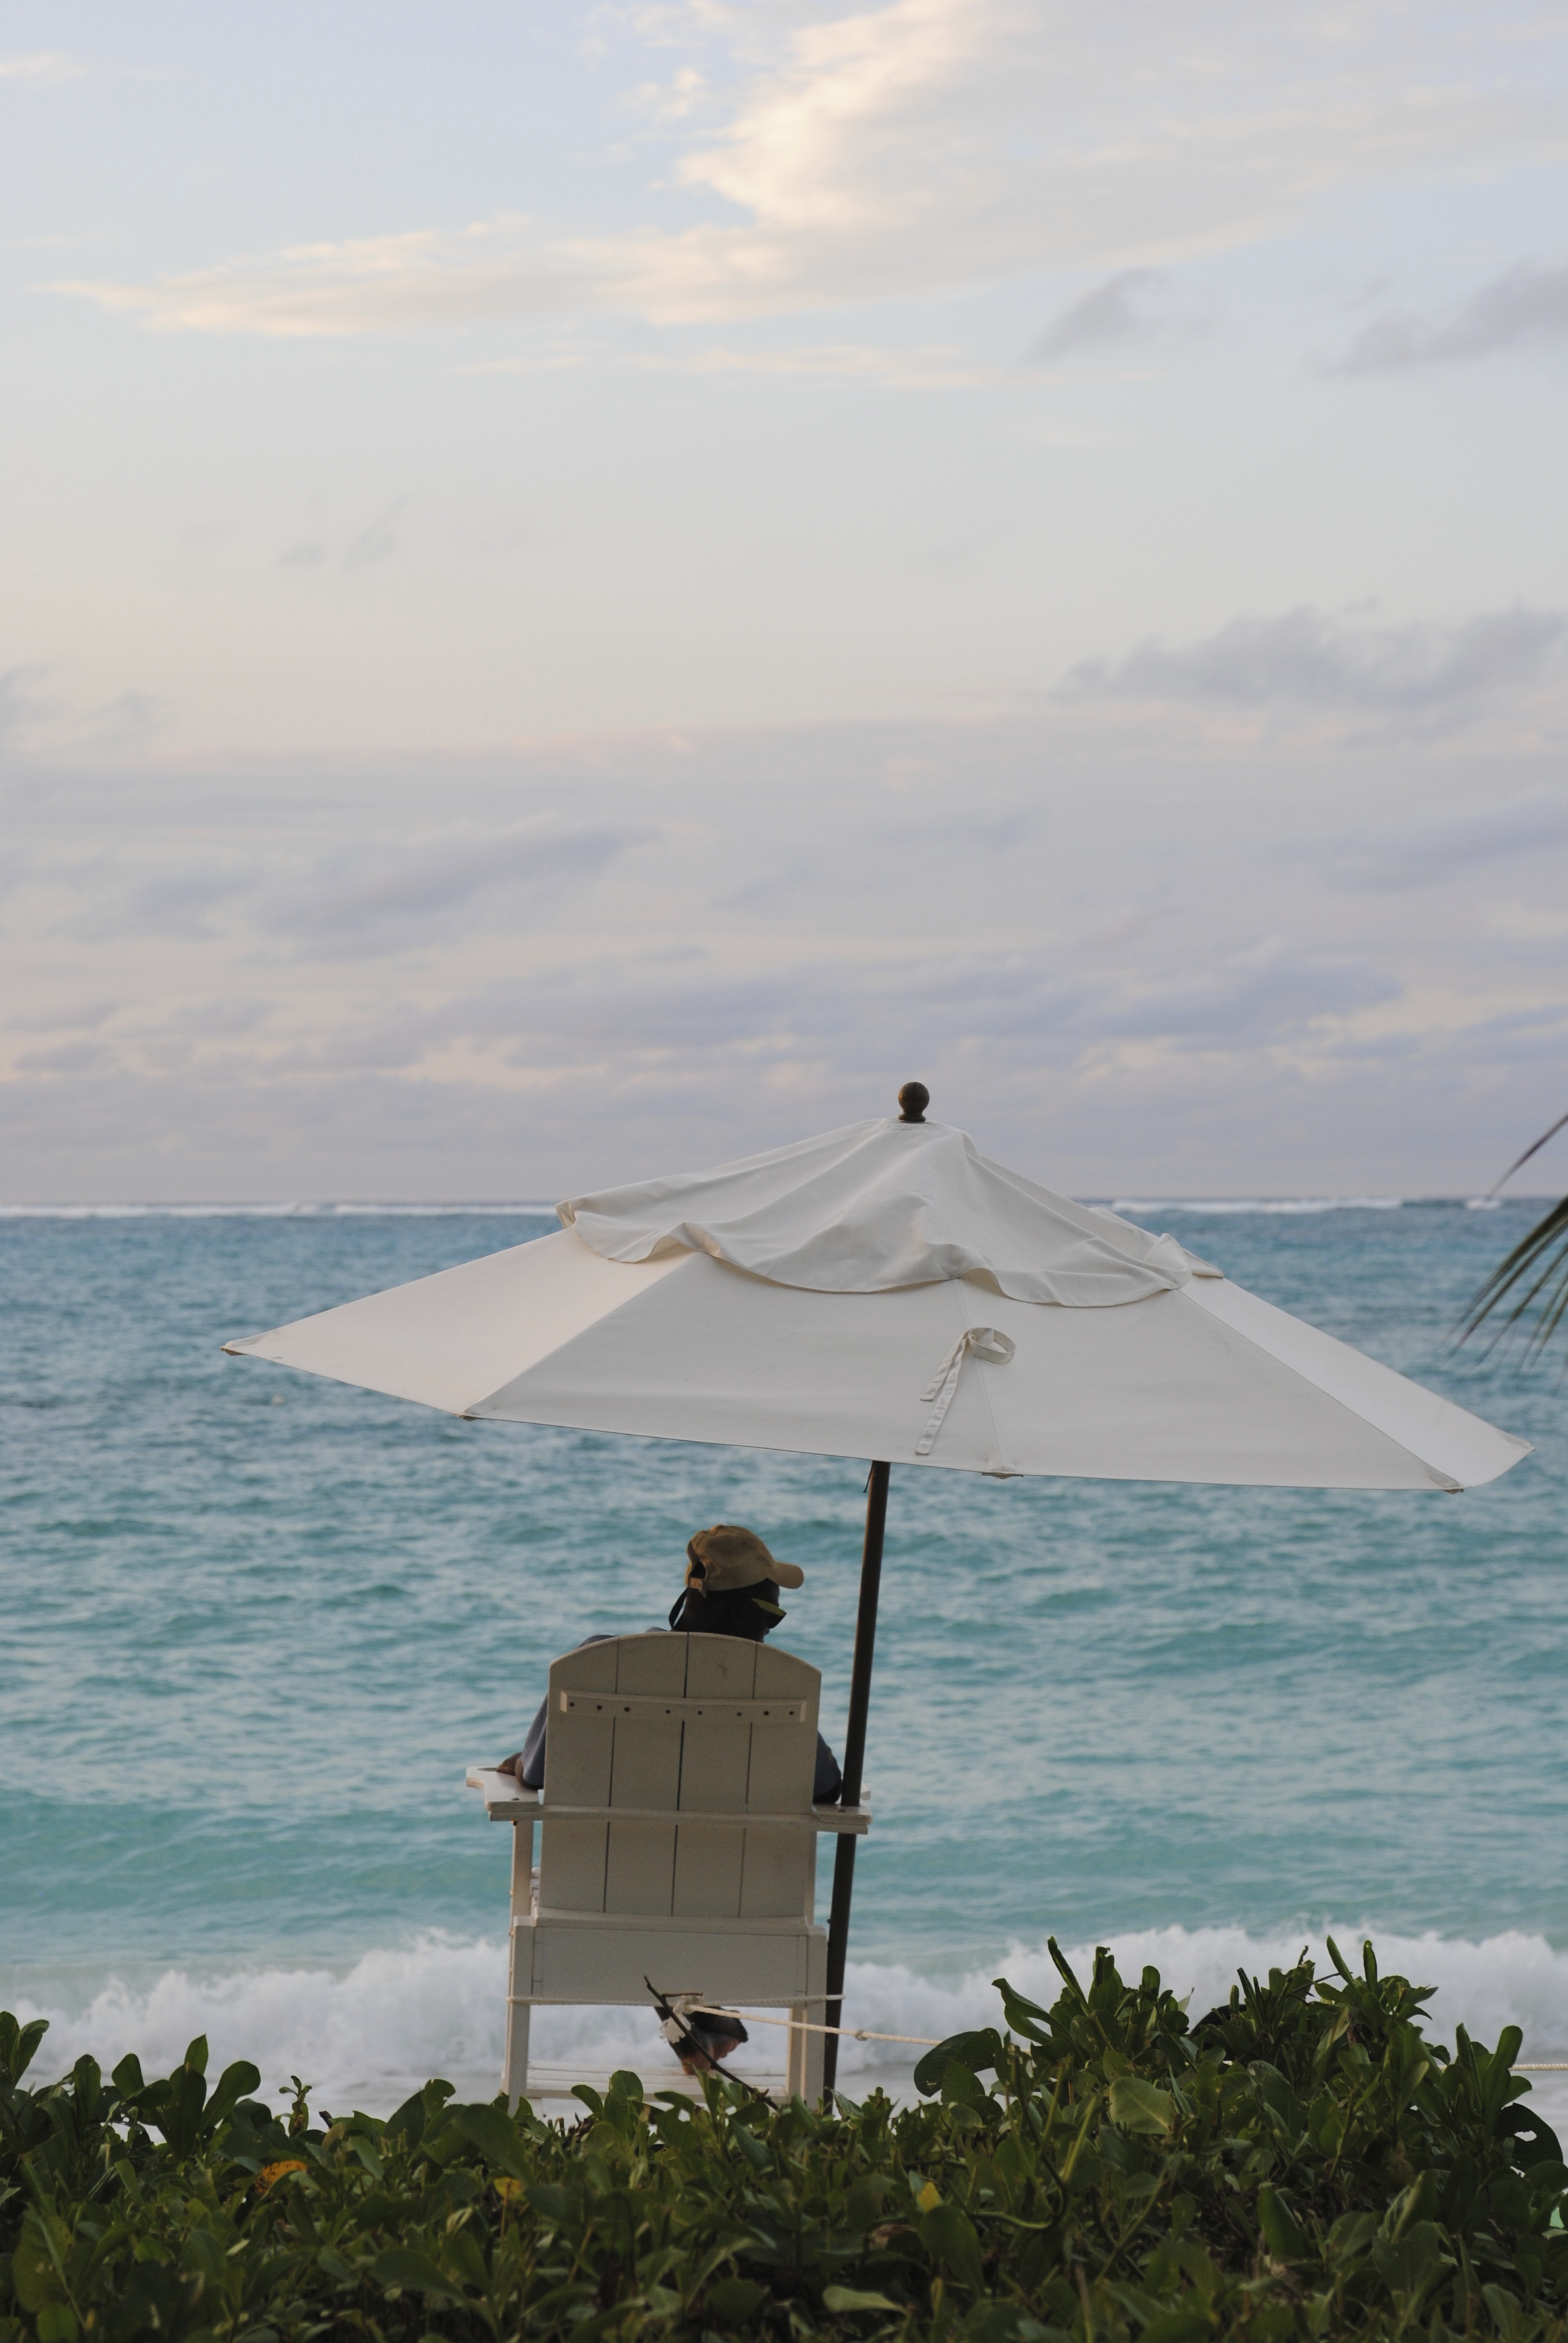 10 things to know before you go to Beaches Turks & Caicos